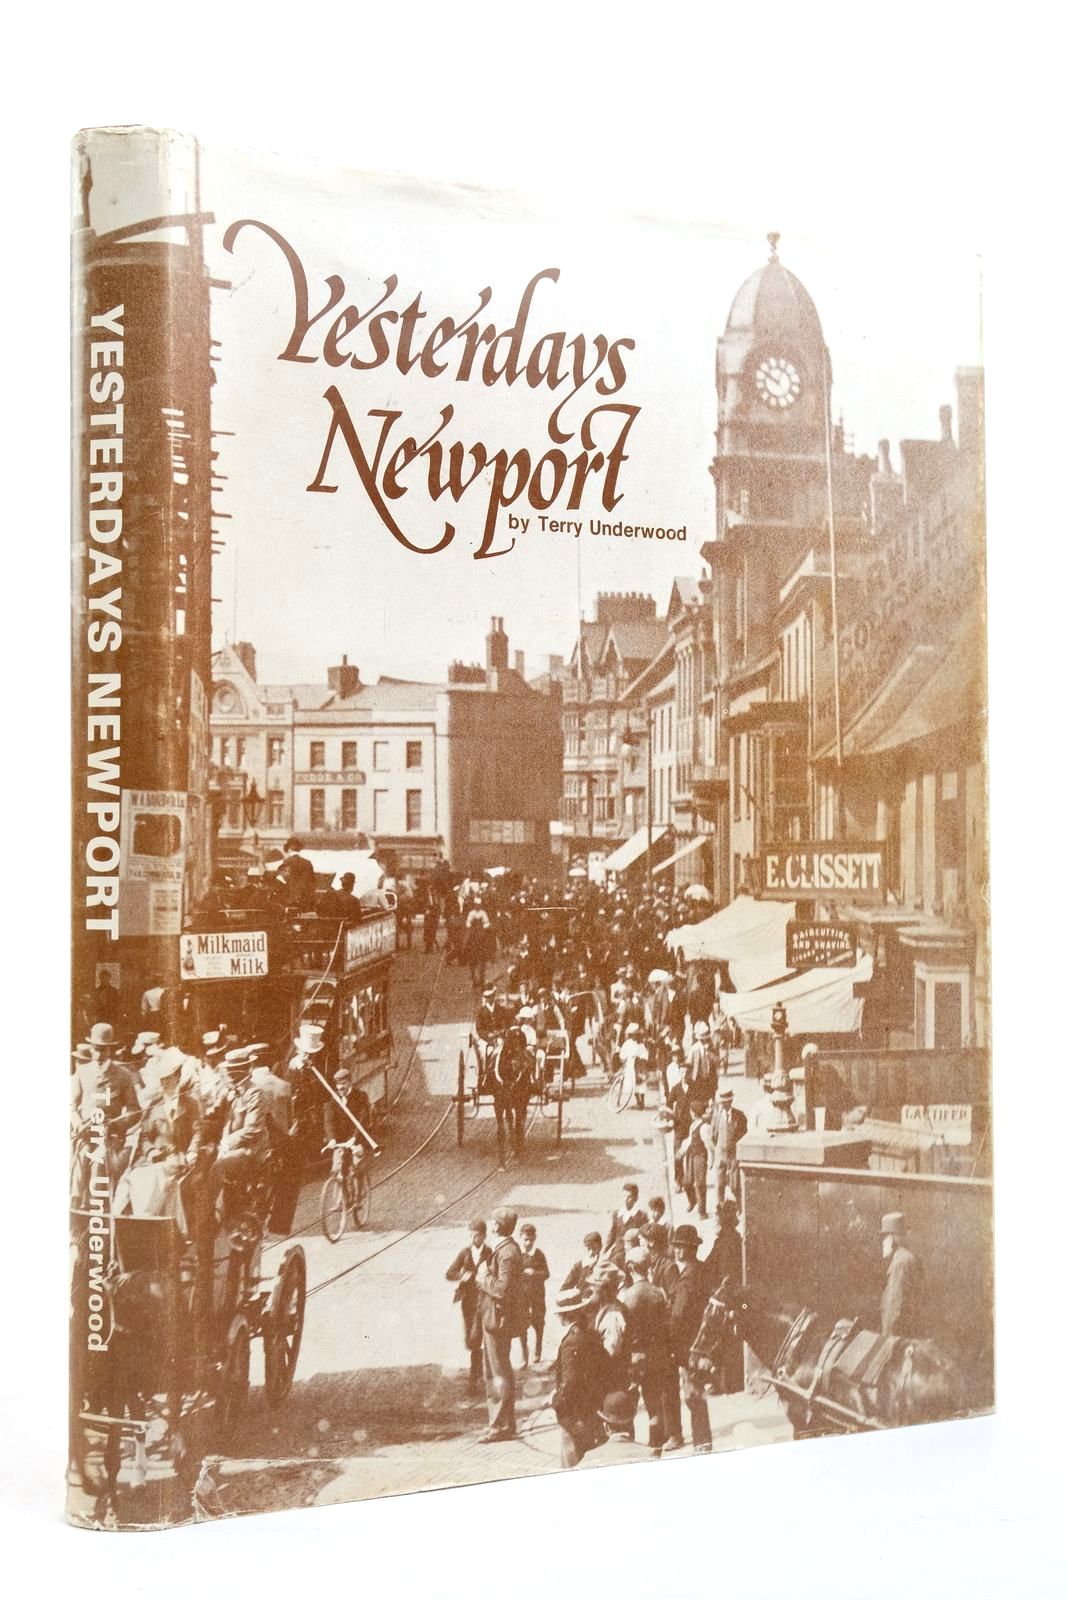 Photo of YESTERDAYS NEWPORT written by Underwood, Terry published by Terry Underwood (STOCK CODE: 2139277)  for sale by Stella & Rose's Books